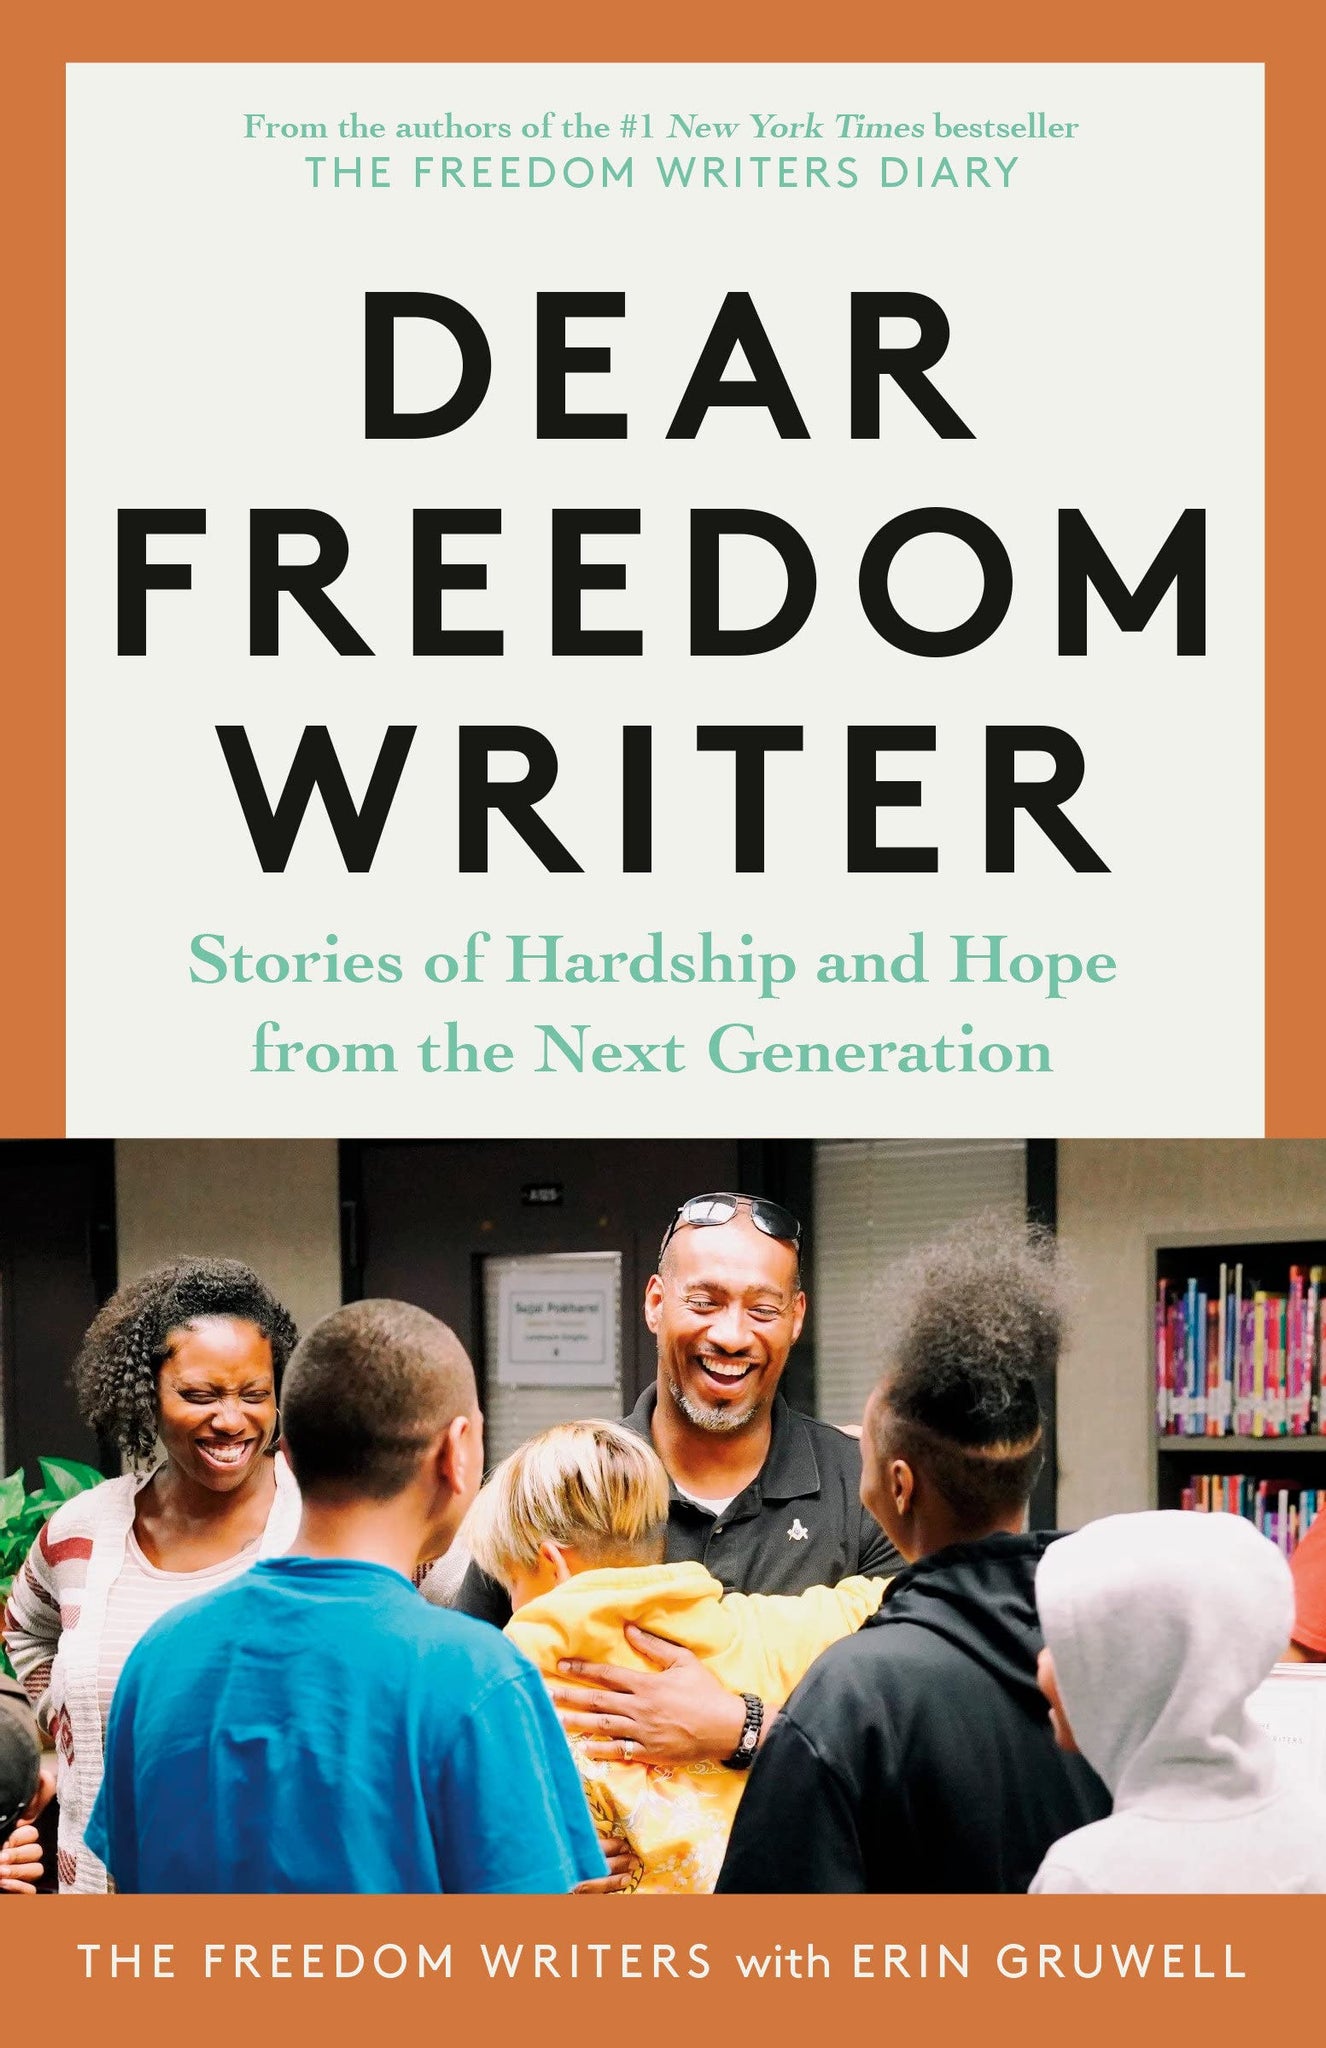 Dear Freedom Writer: Stories of Hardship and Hope from the Next Generation (Paperback)